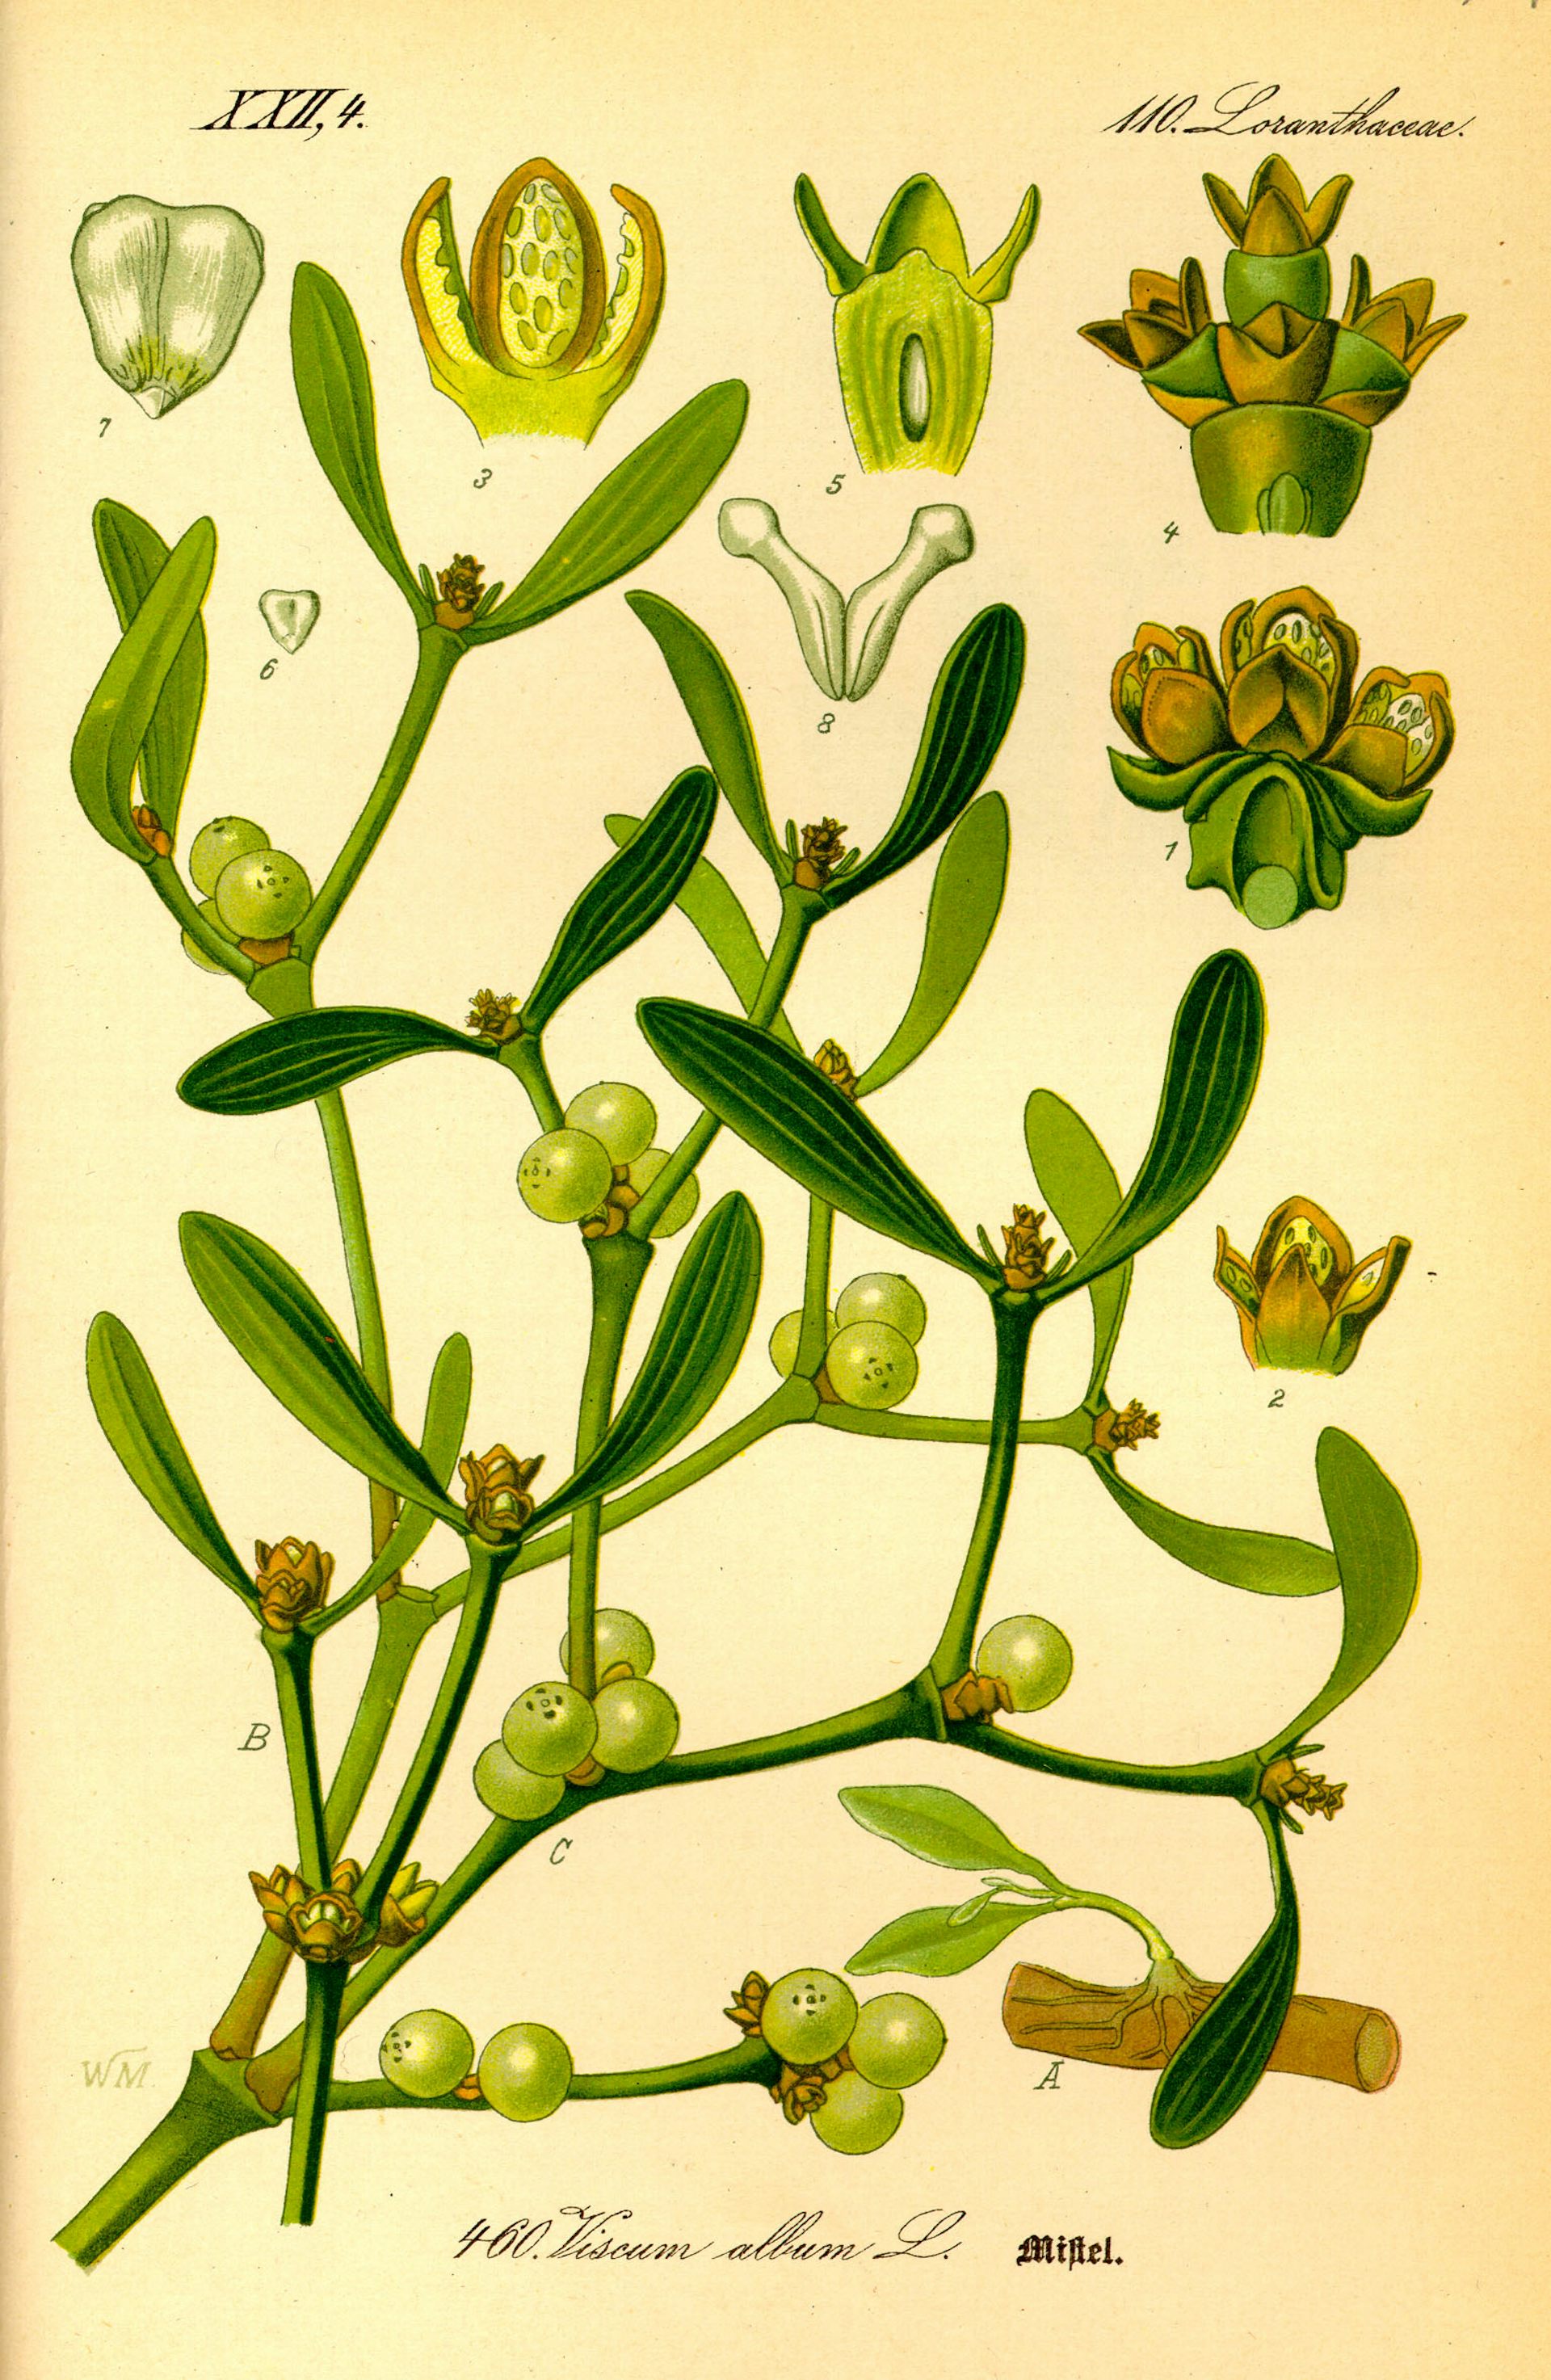 andrew subiela recommends Images Of Mistletoe